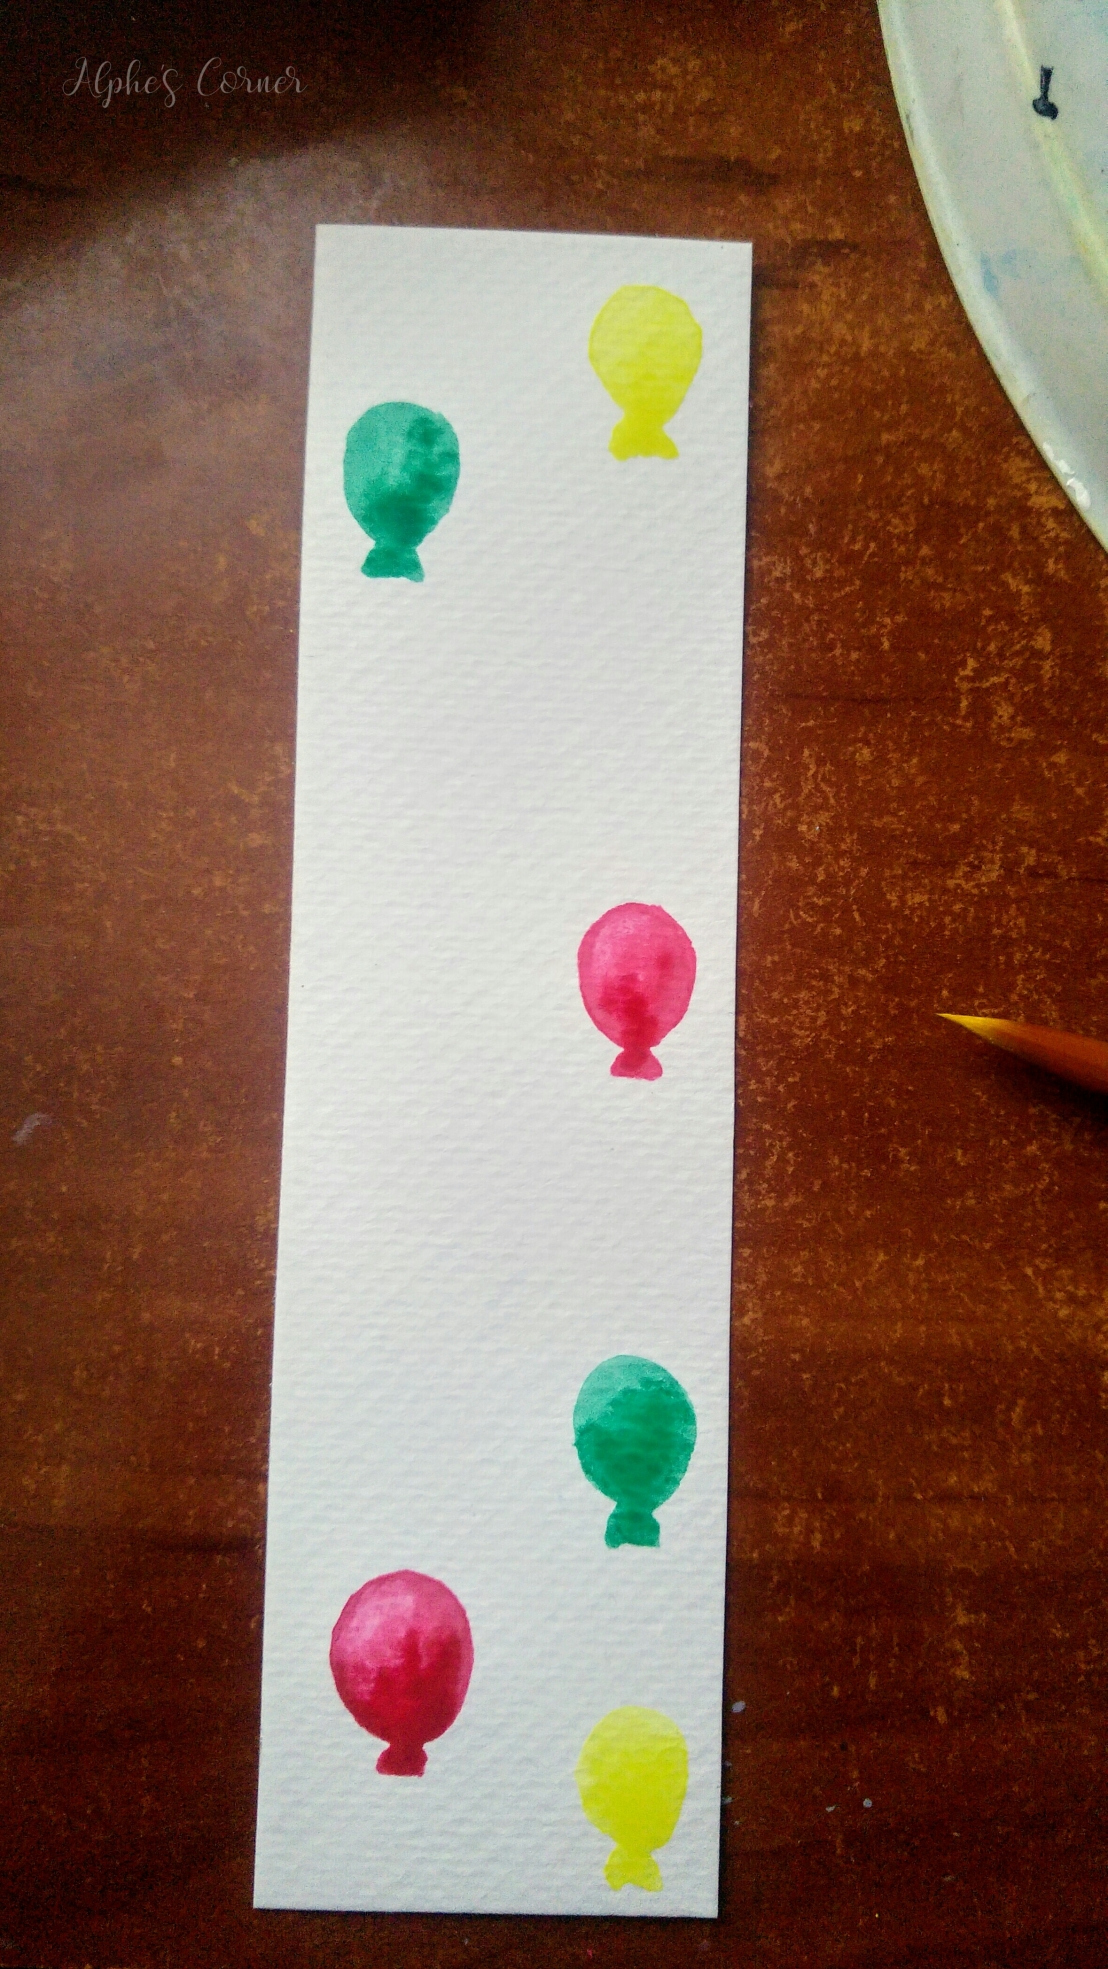 Painting the first balloons